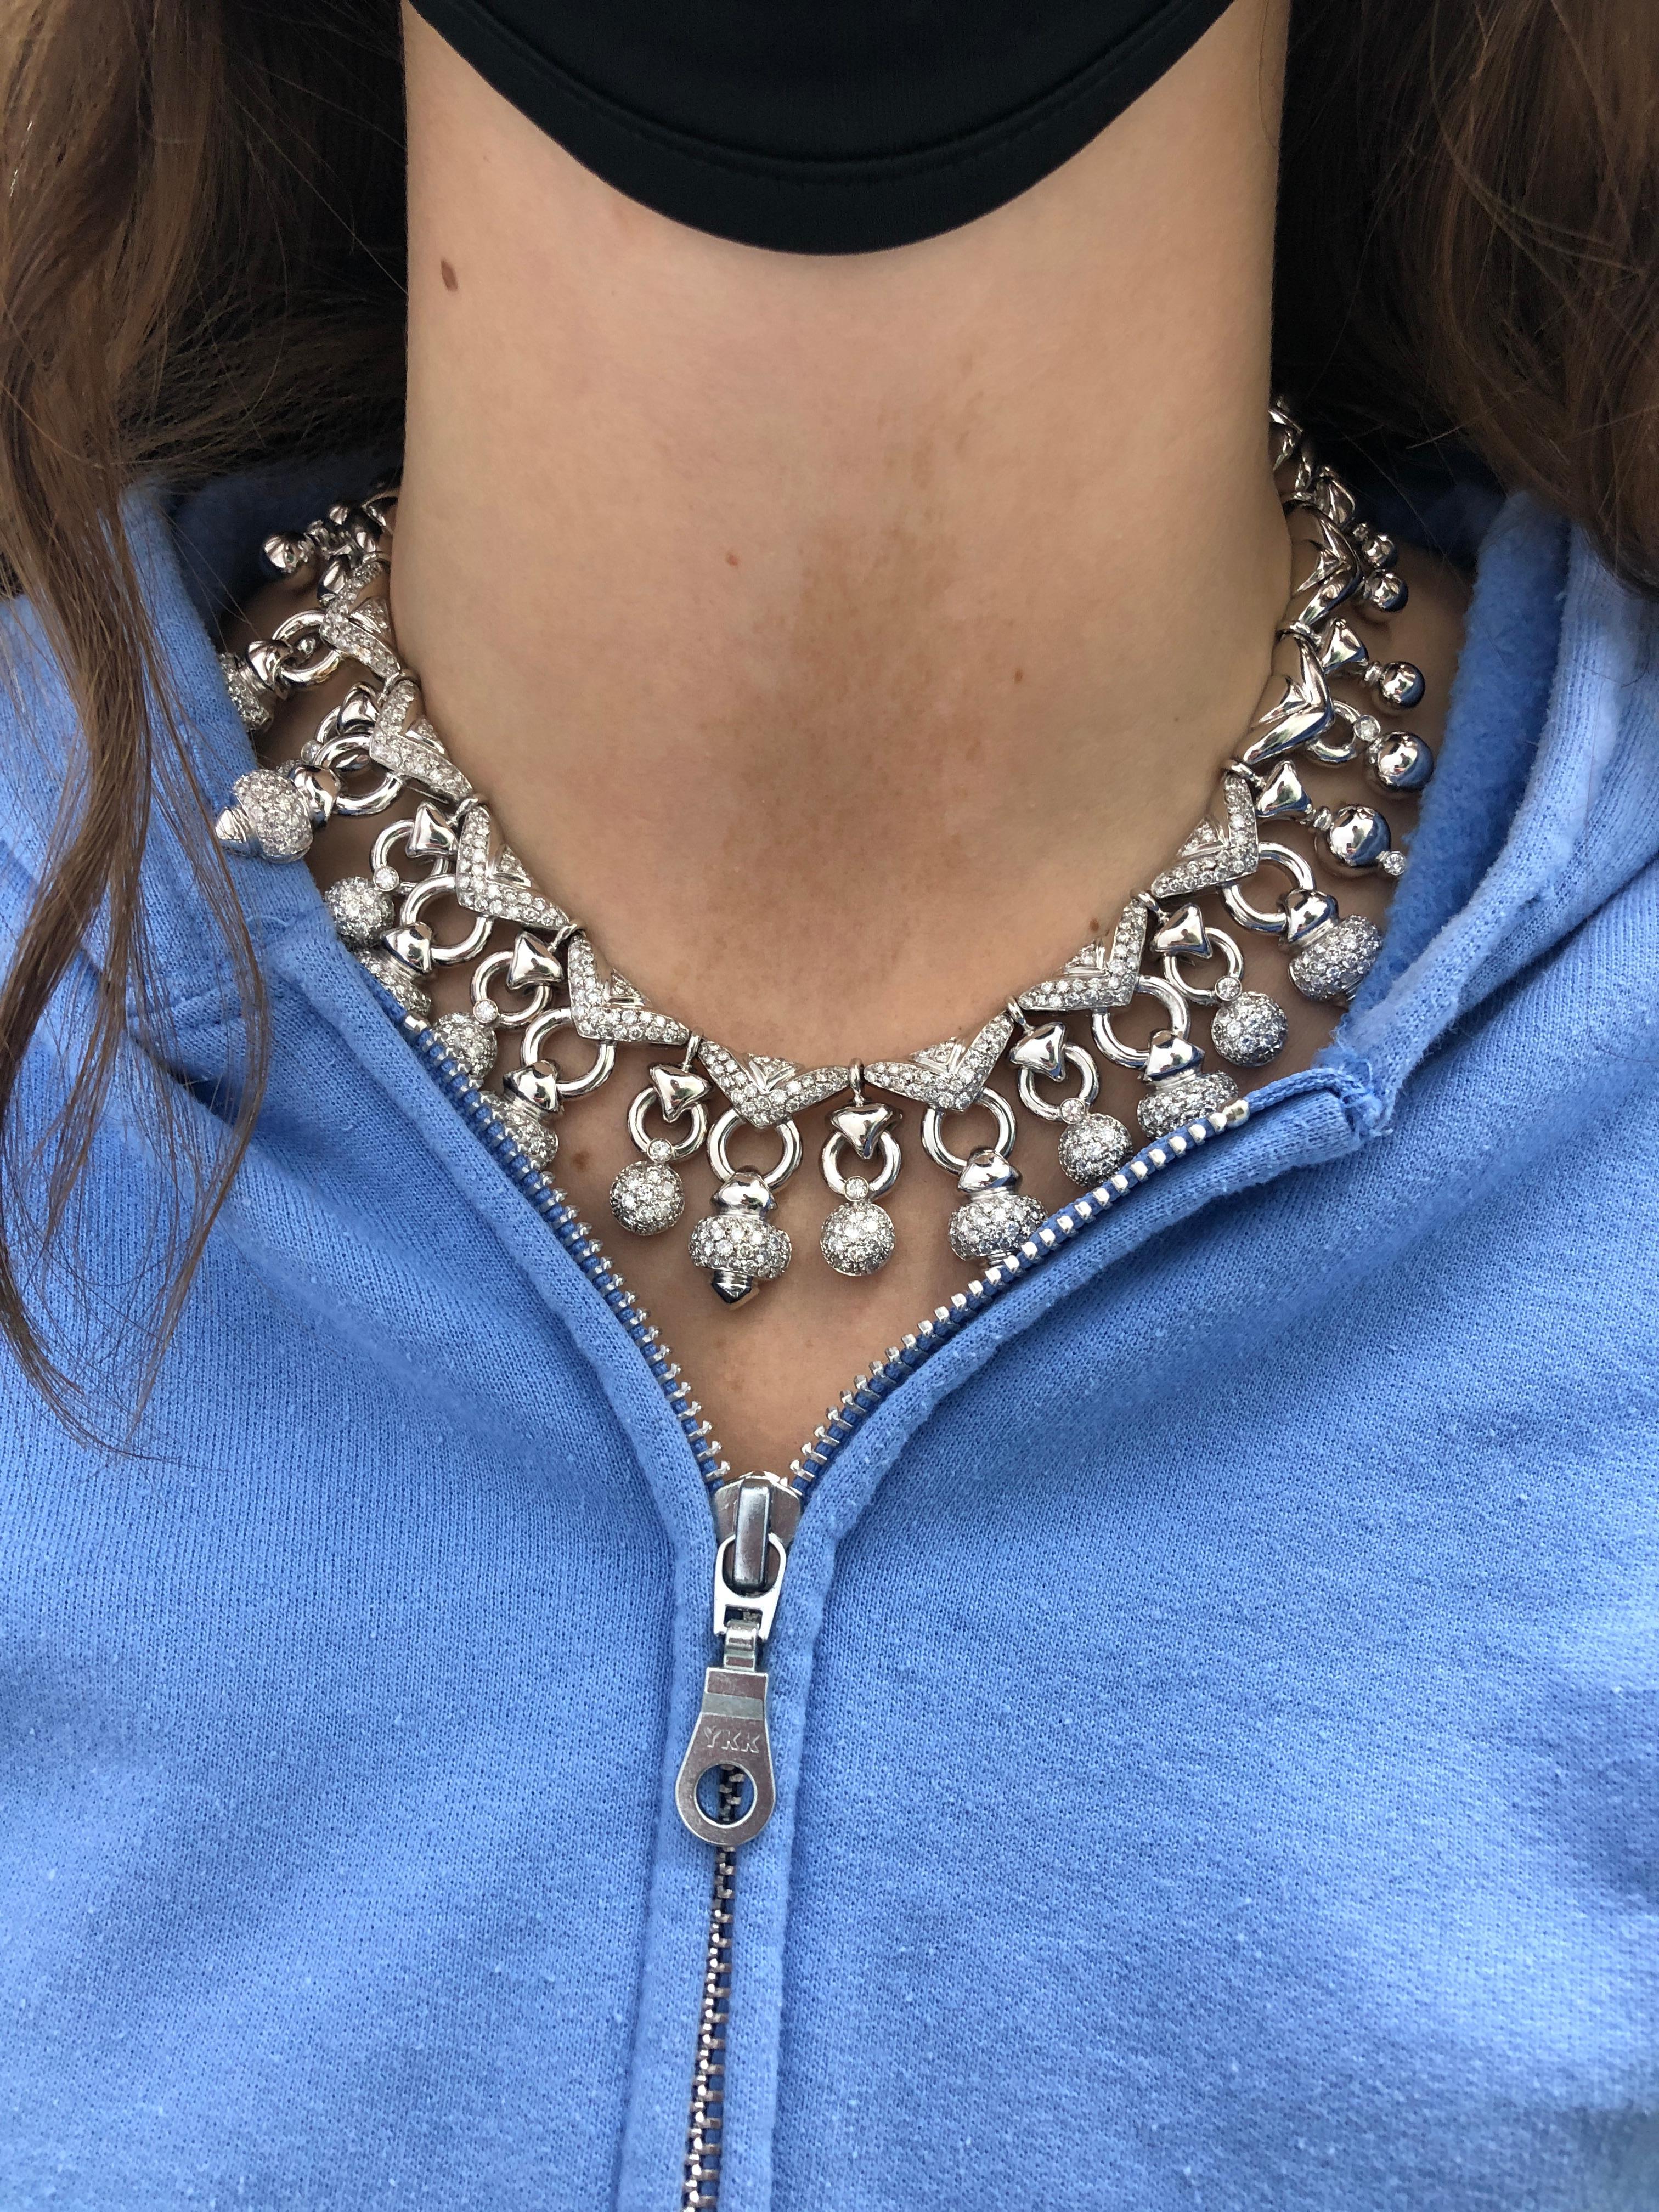 An 18K white gold necklace consisting of round-cut diamonds weighing a total of approximately 20 carats, VS clarity, G color.

Stone: Diamond ~ 20 carats

Metal: 18K White Gold

Size: 15 1/2